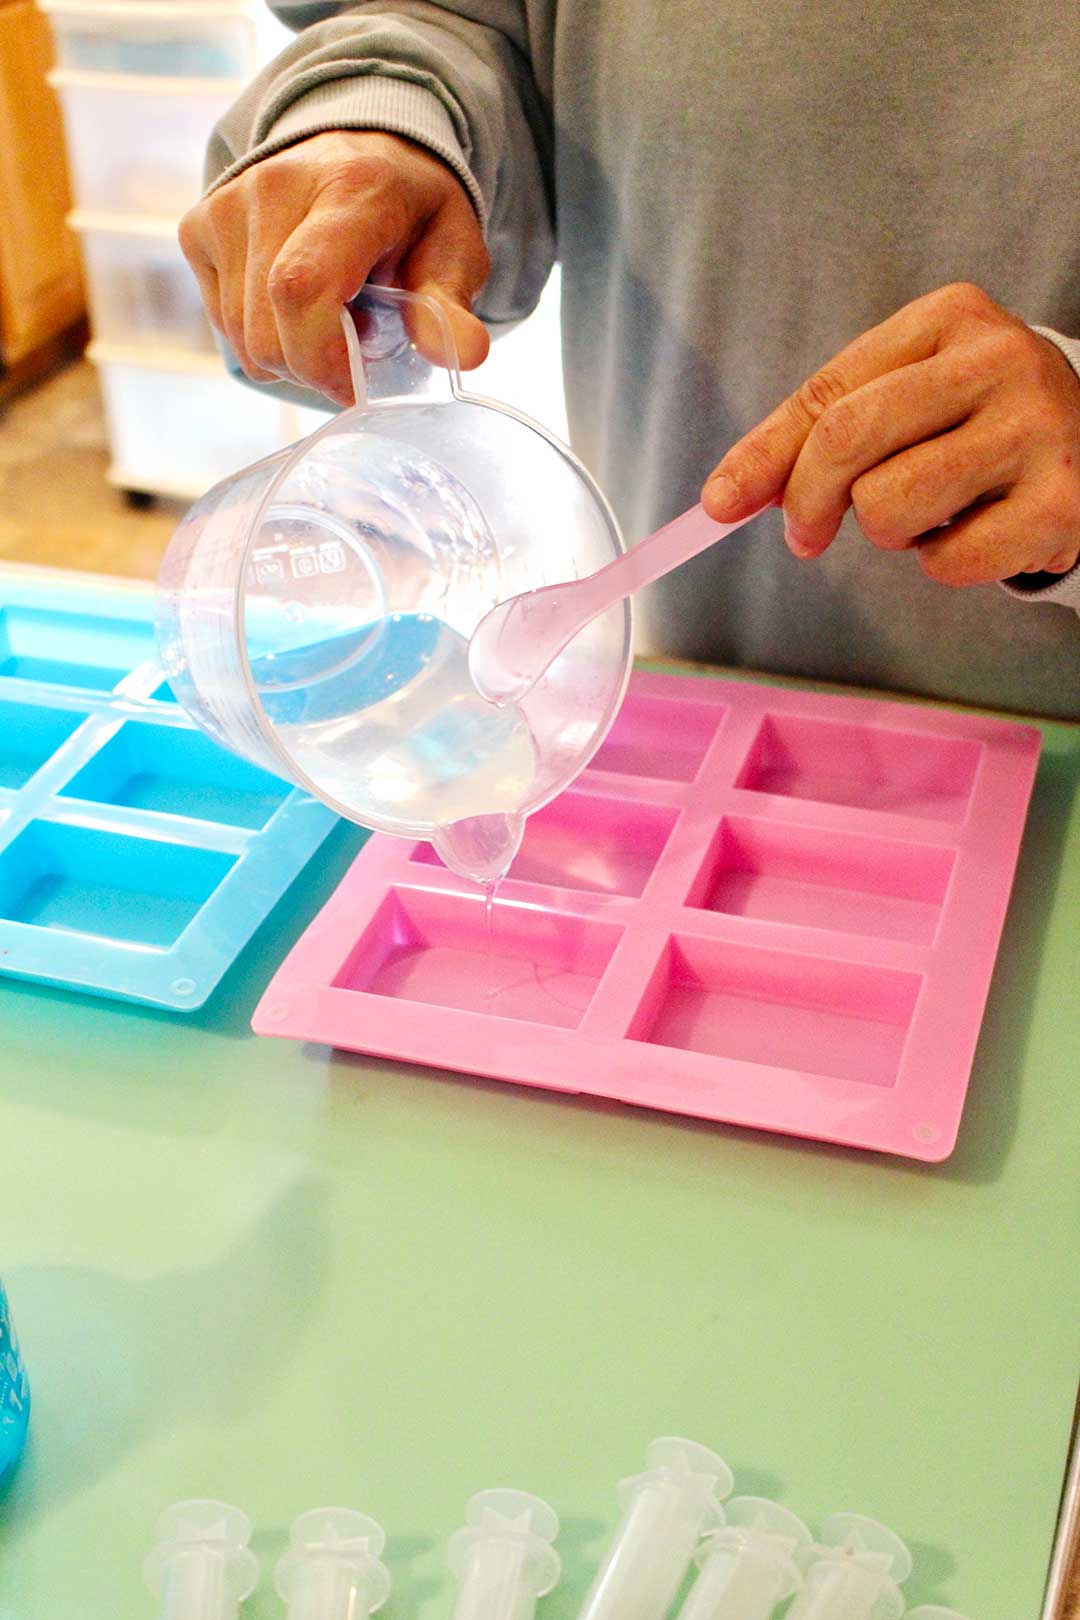 Hands pouring melted soap from measuring cup into pink silicone rectangular soap mold.